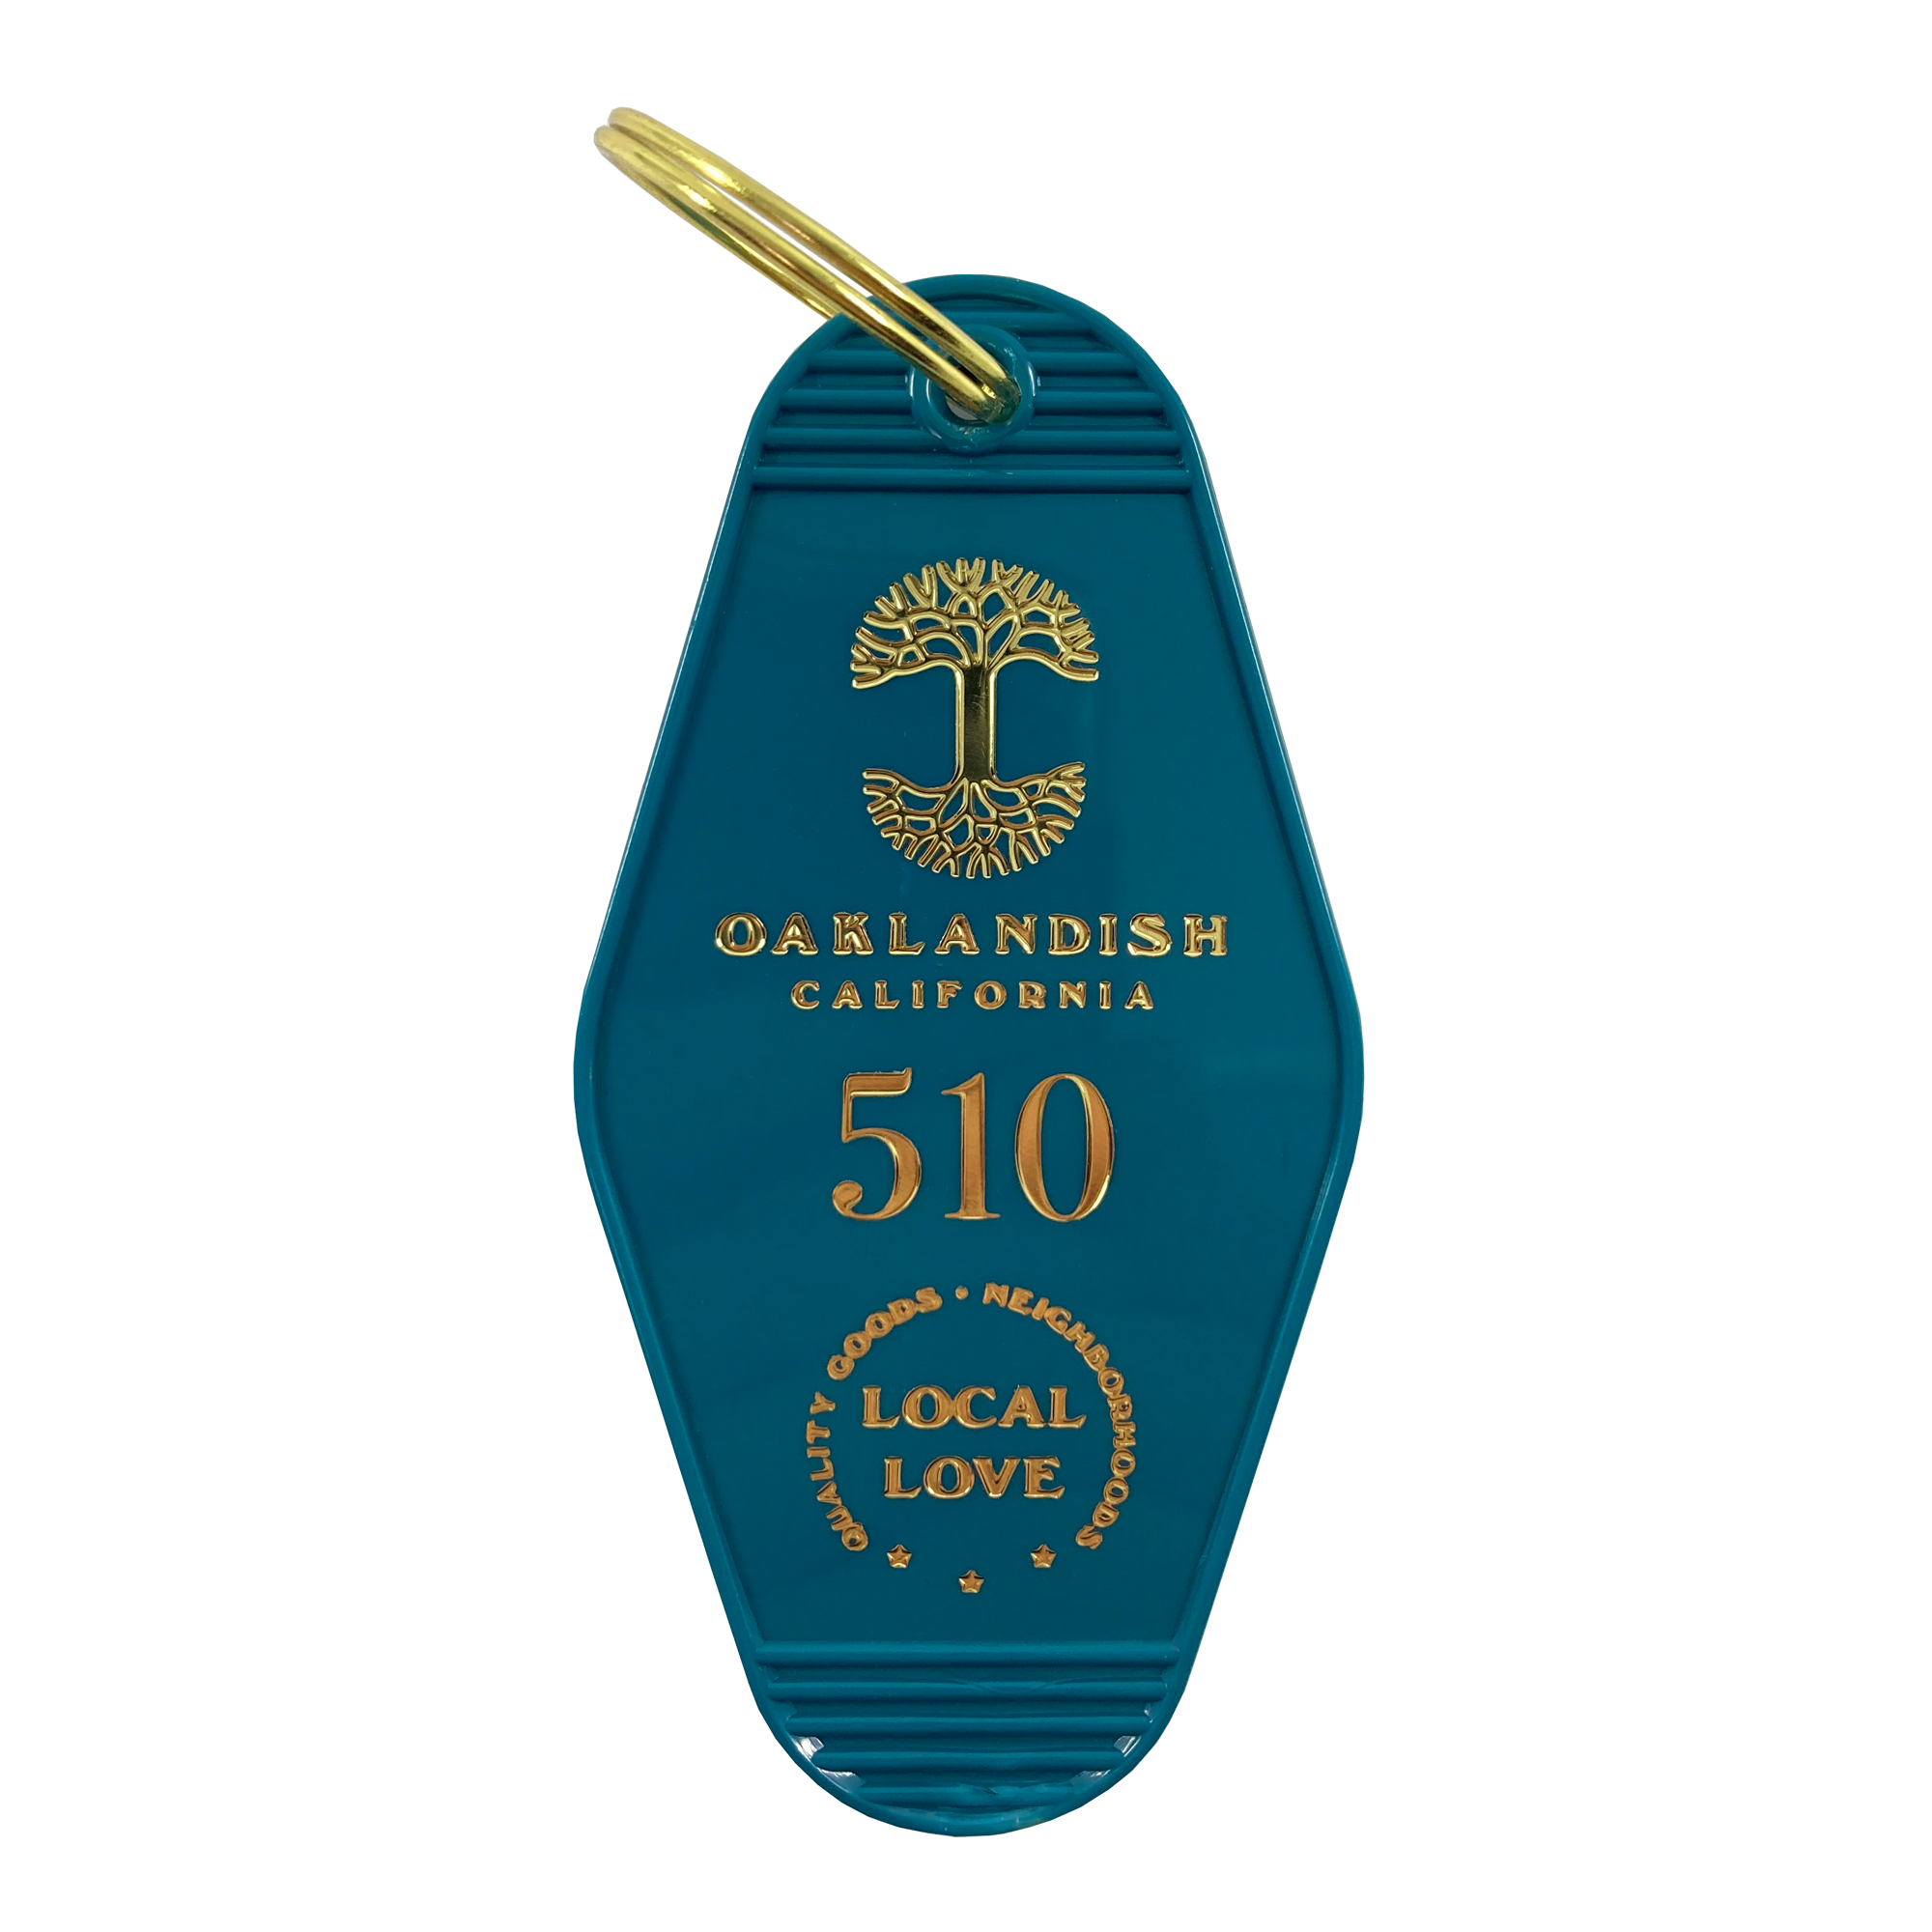  Blue vintage motel-style keychain with gold Oaklandish Logo and wordmark and 510 local love logo.